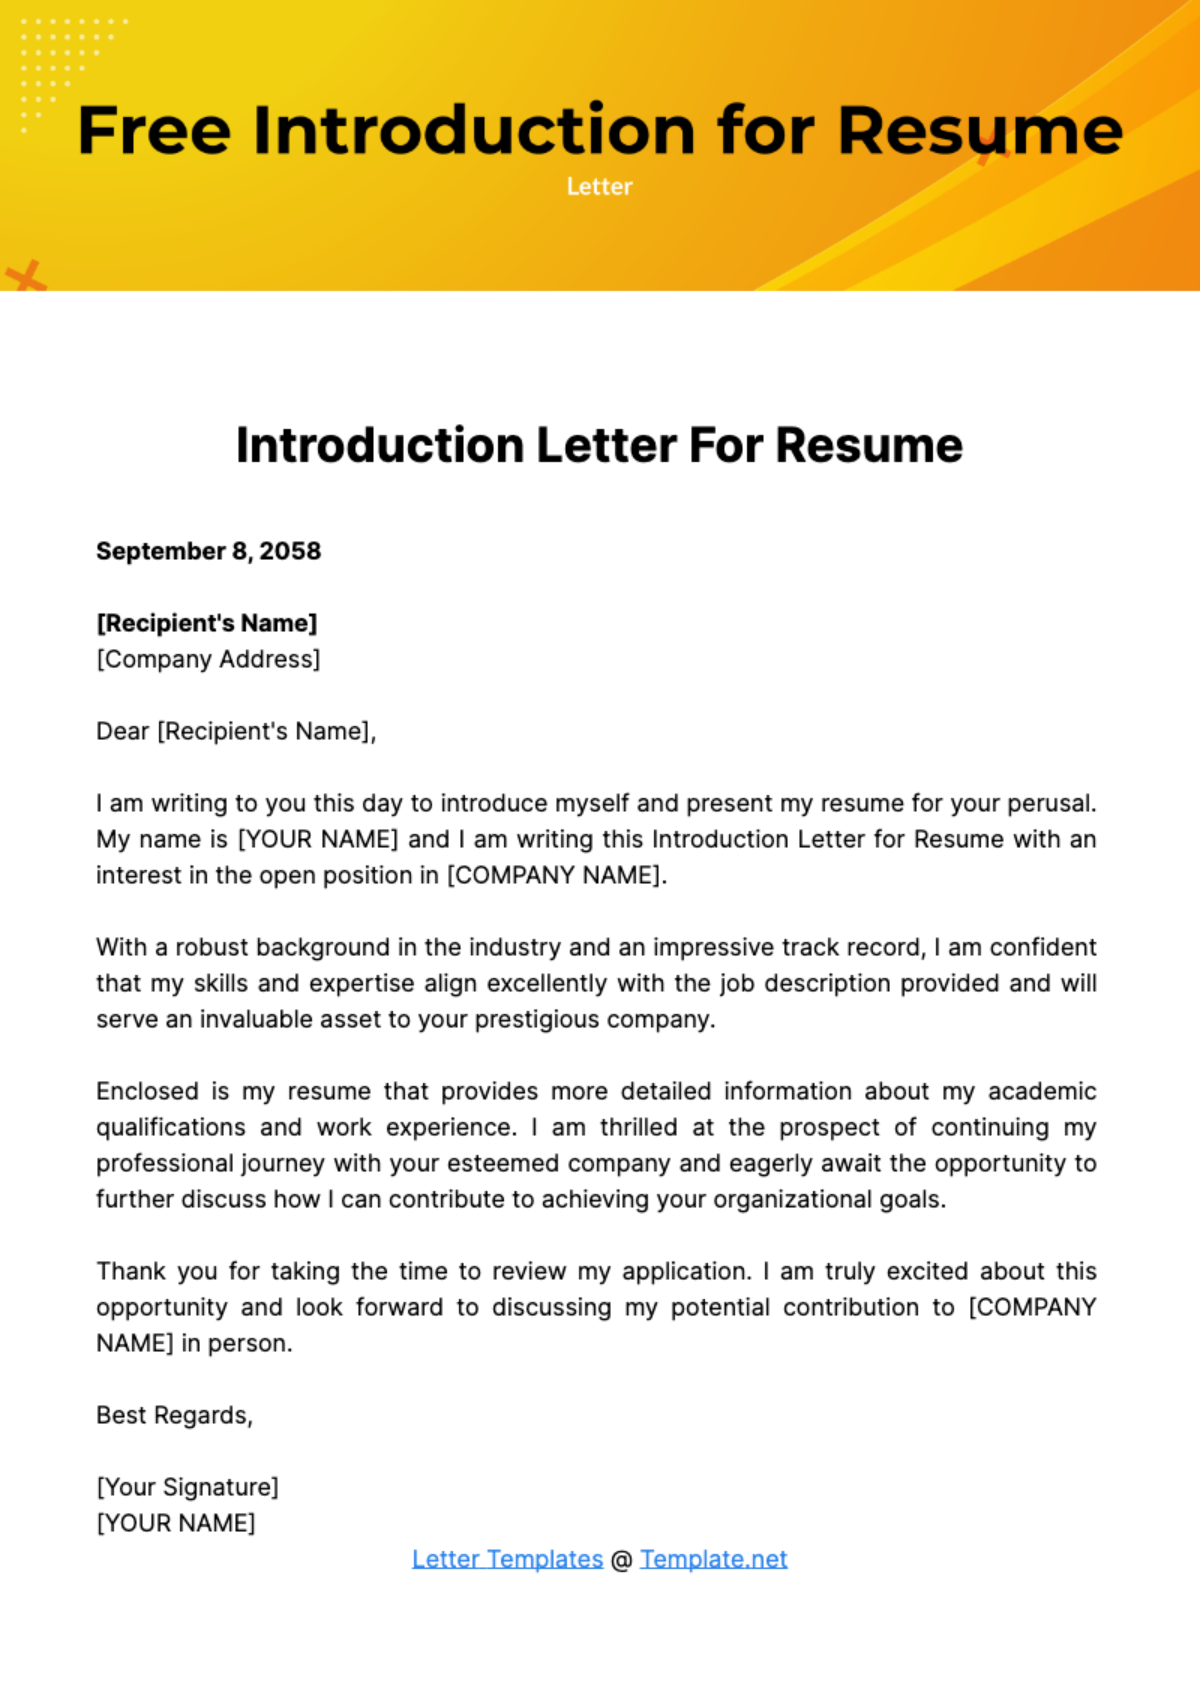 Free Introduction Letter for Resume Template